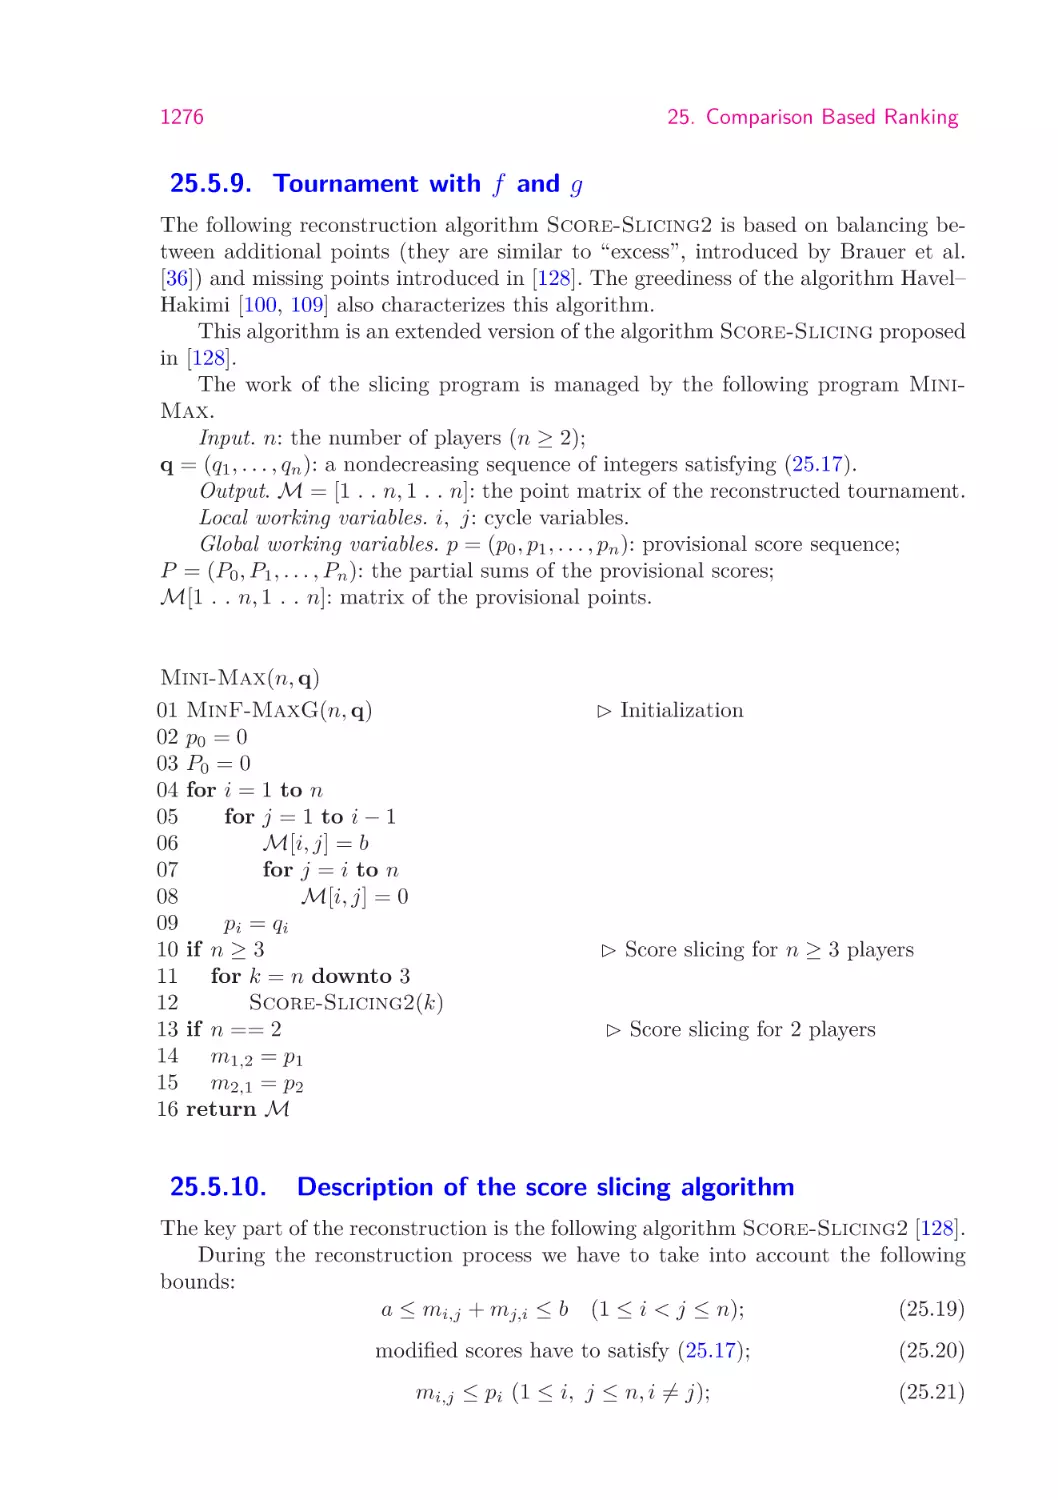 25.5.9.  Tournament with f and g
25.5.10.   Description of the score slicing algorithm